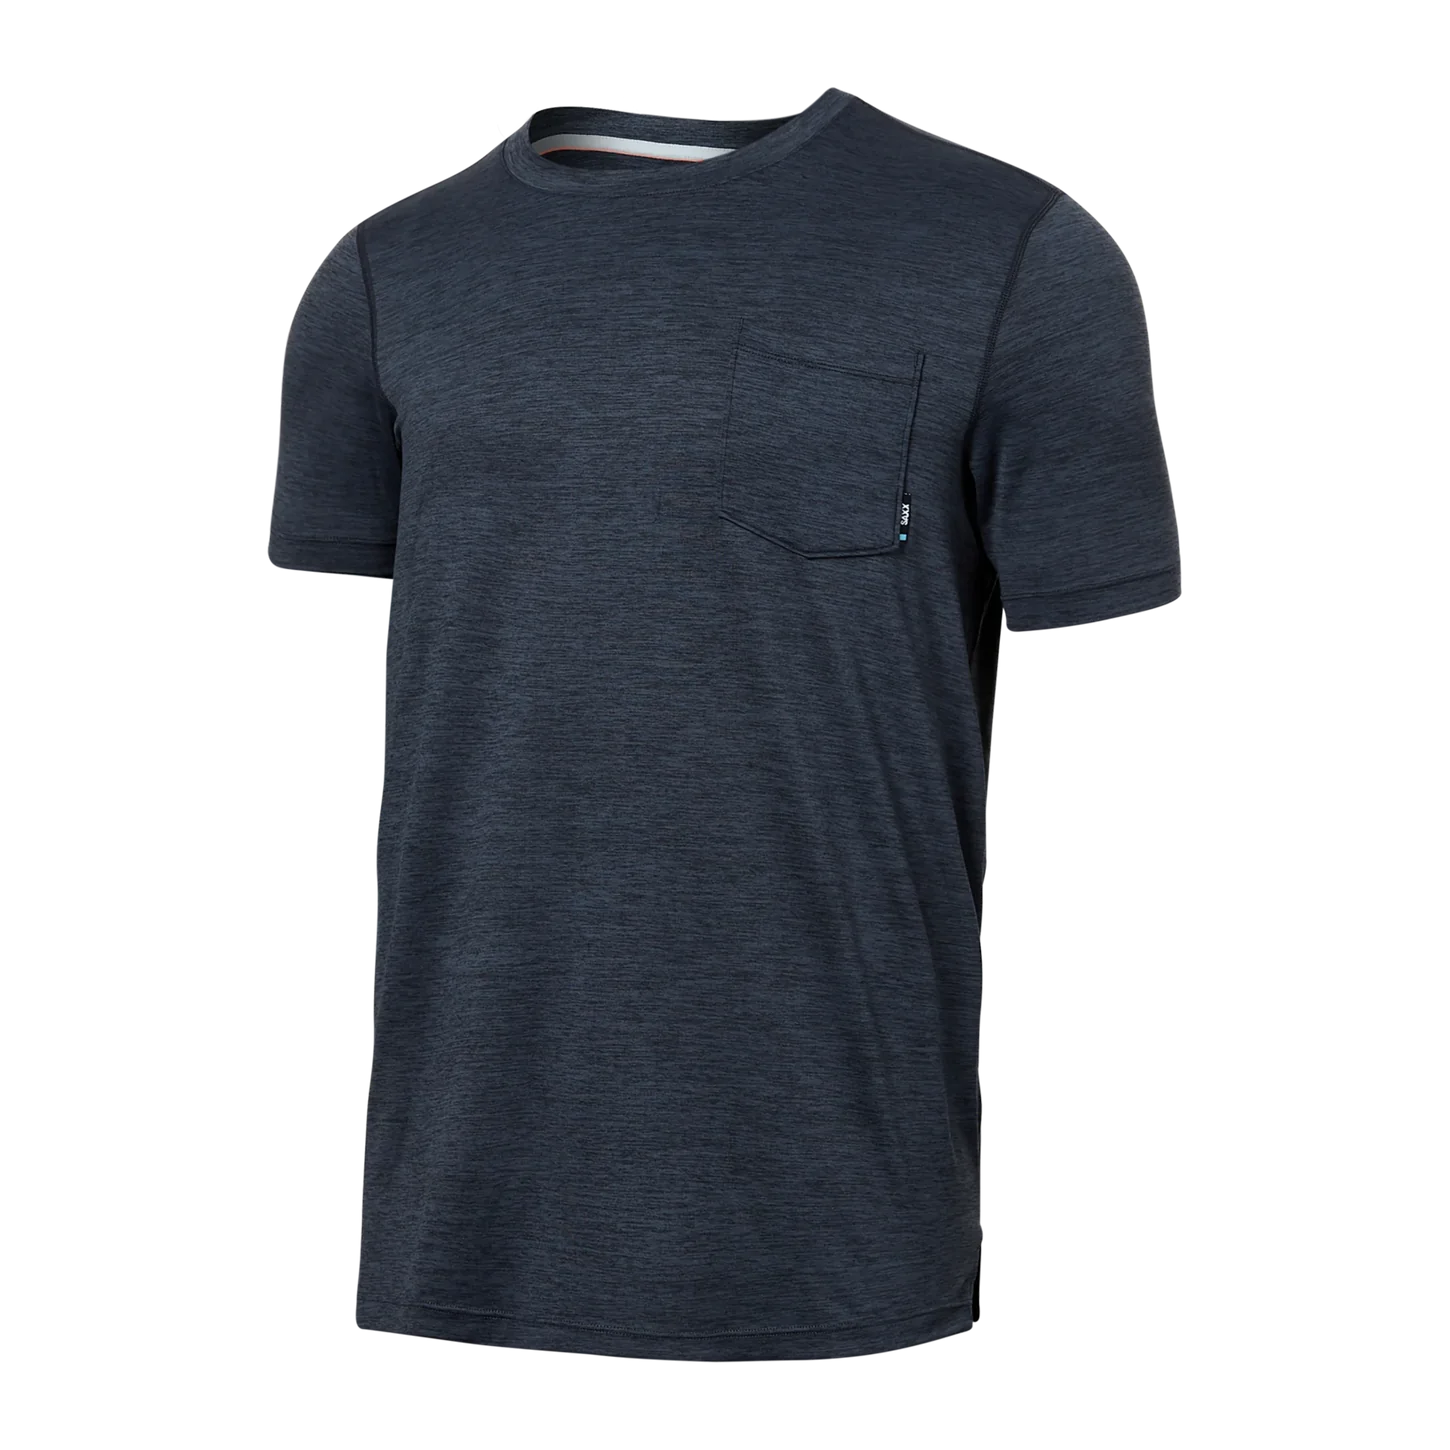 SAXX Droptemp Cooling Cotton S/S Pocket Tee - Washed Blue Heather - 1 - Tops - Shirts (Short Sleeve)